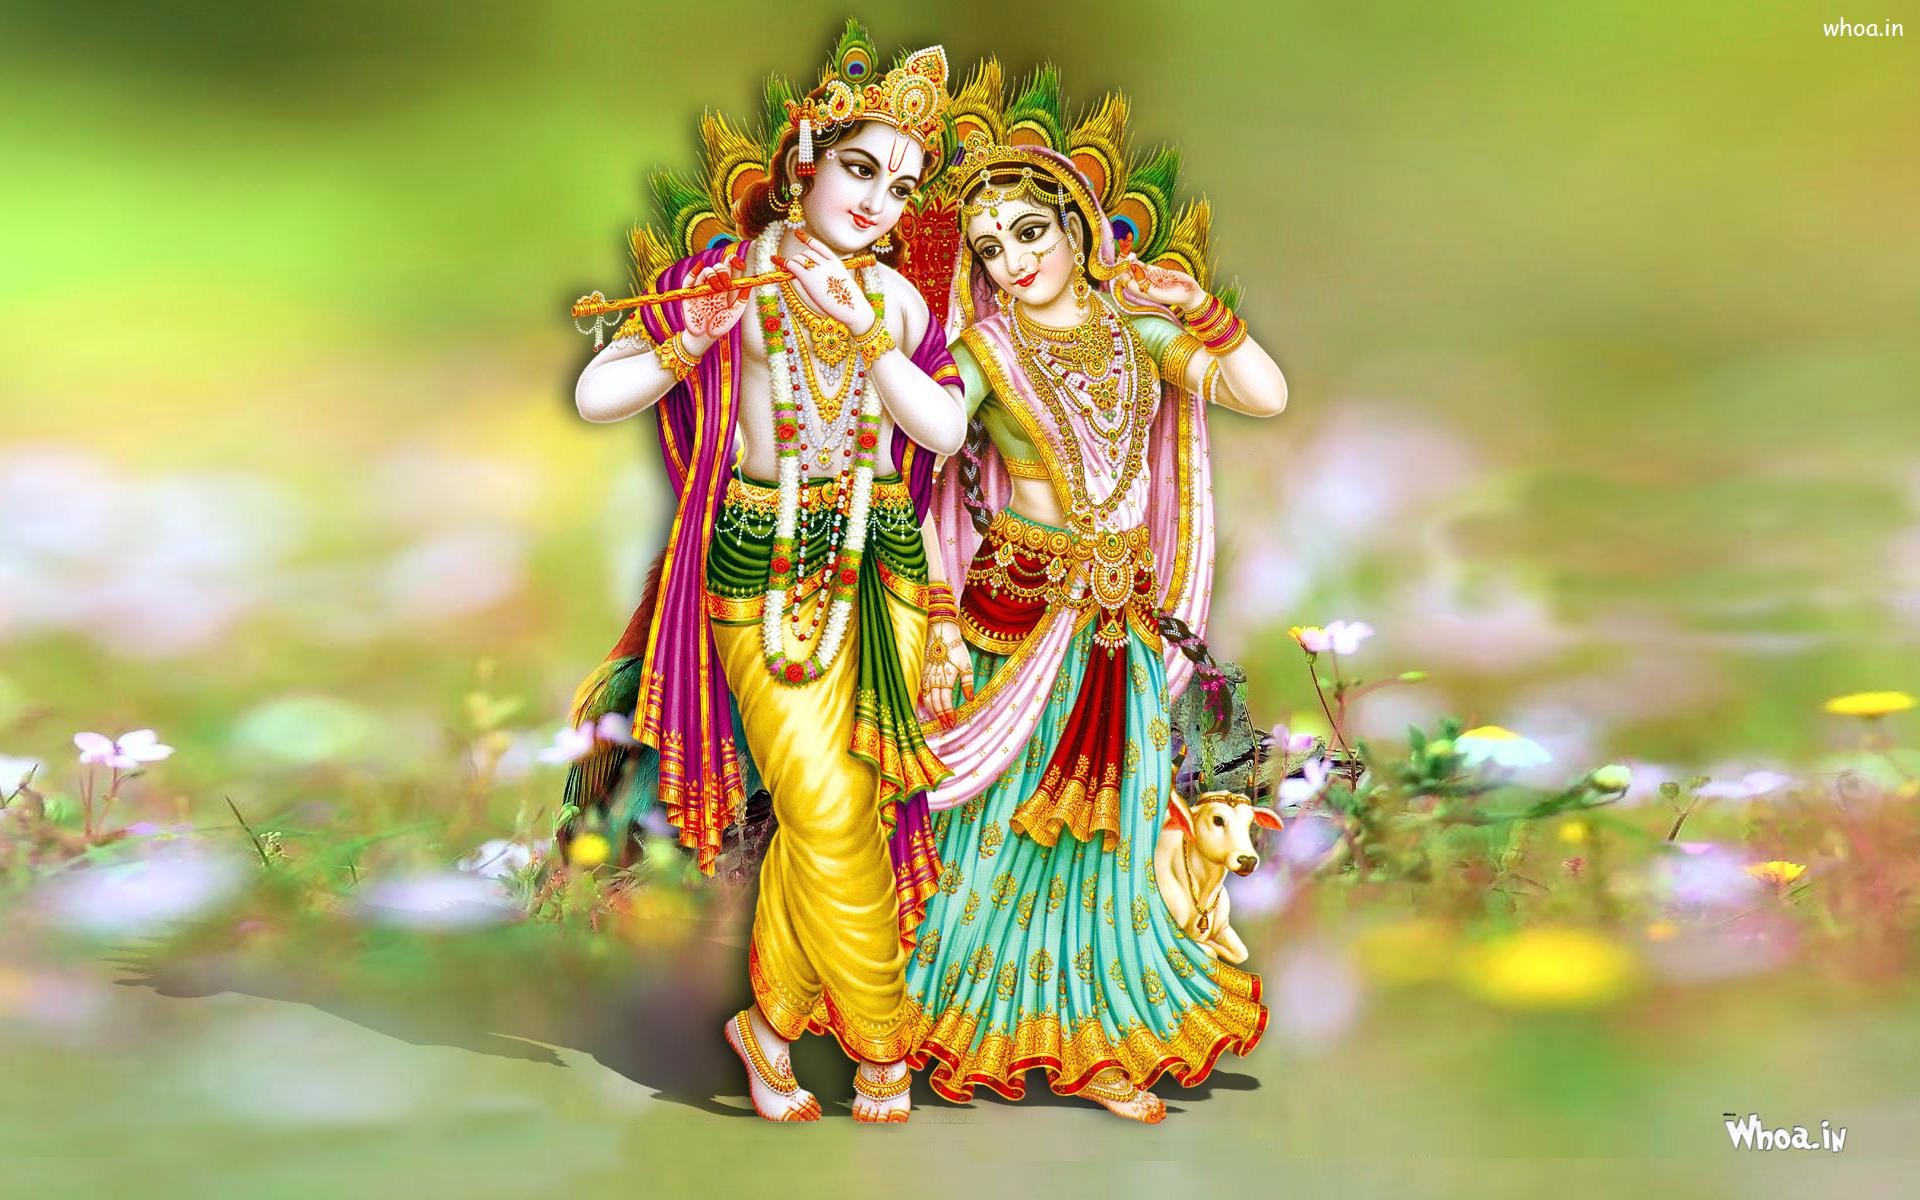 15 Greatest 4k wallpaper krishna radha You Can Save It At No Cost